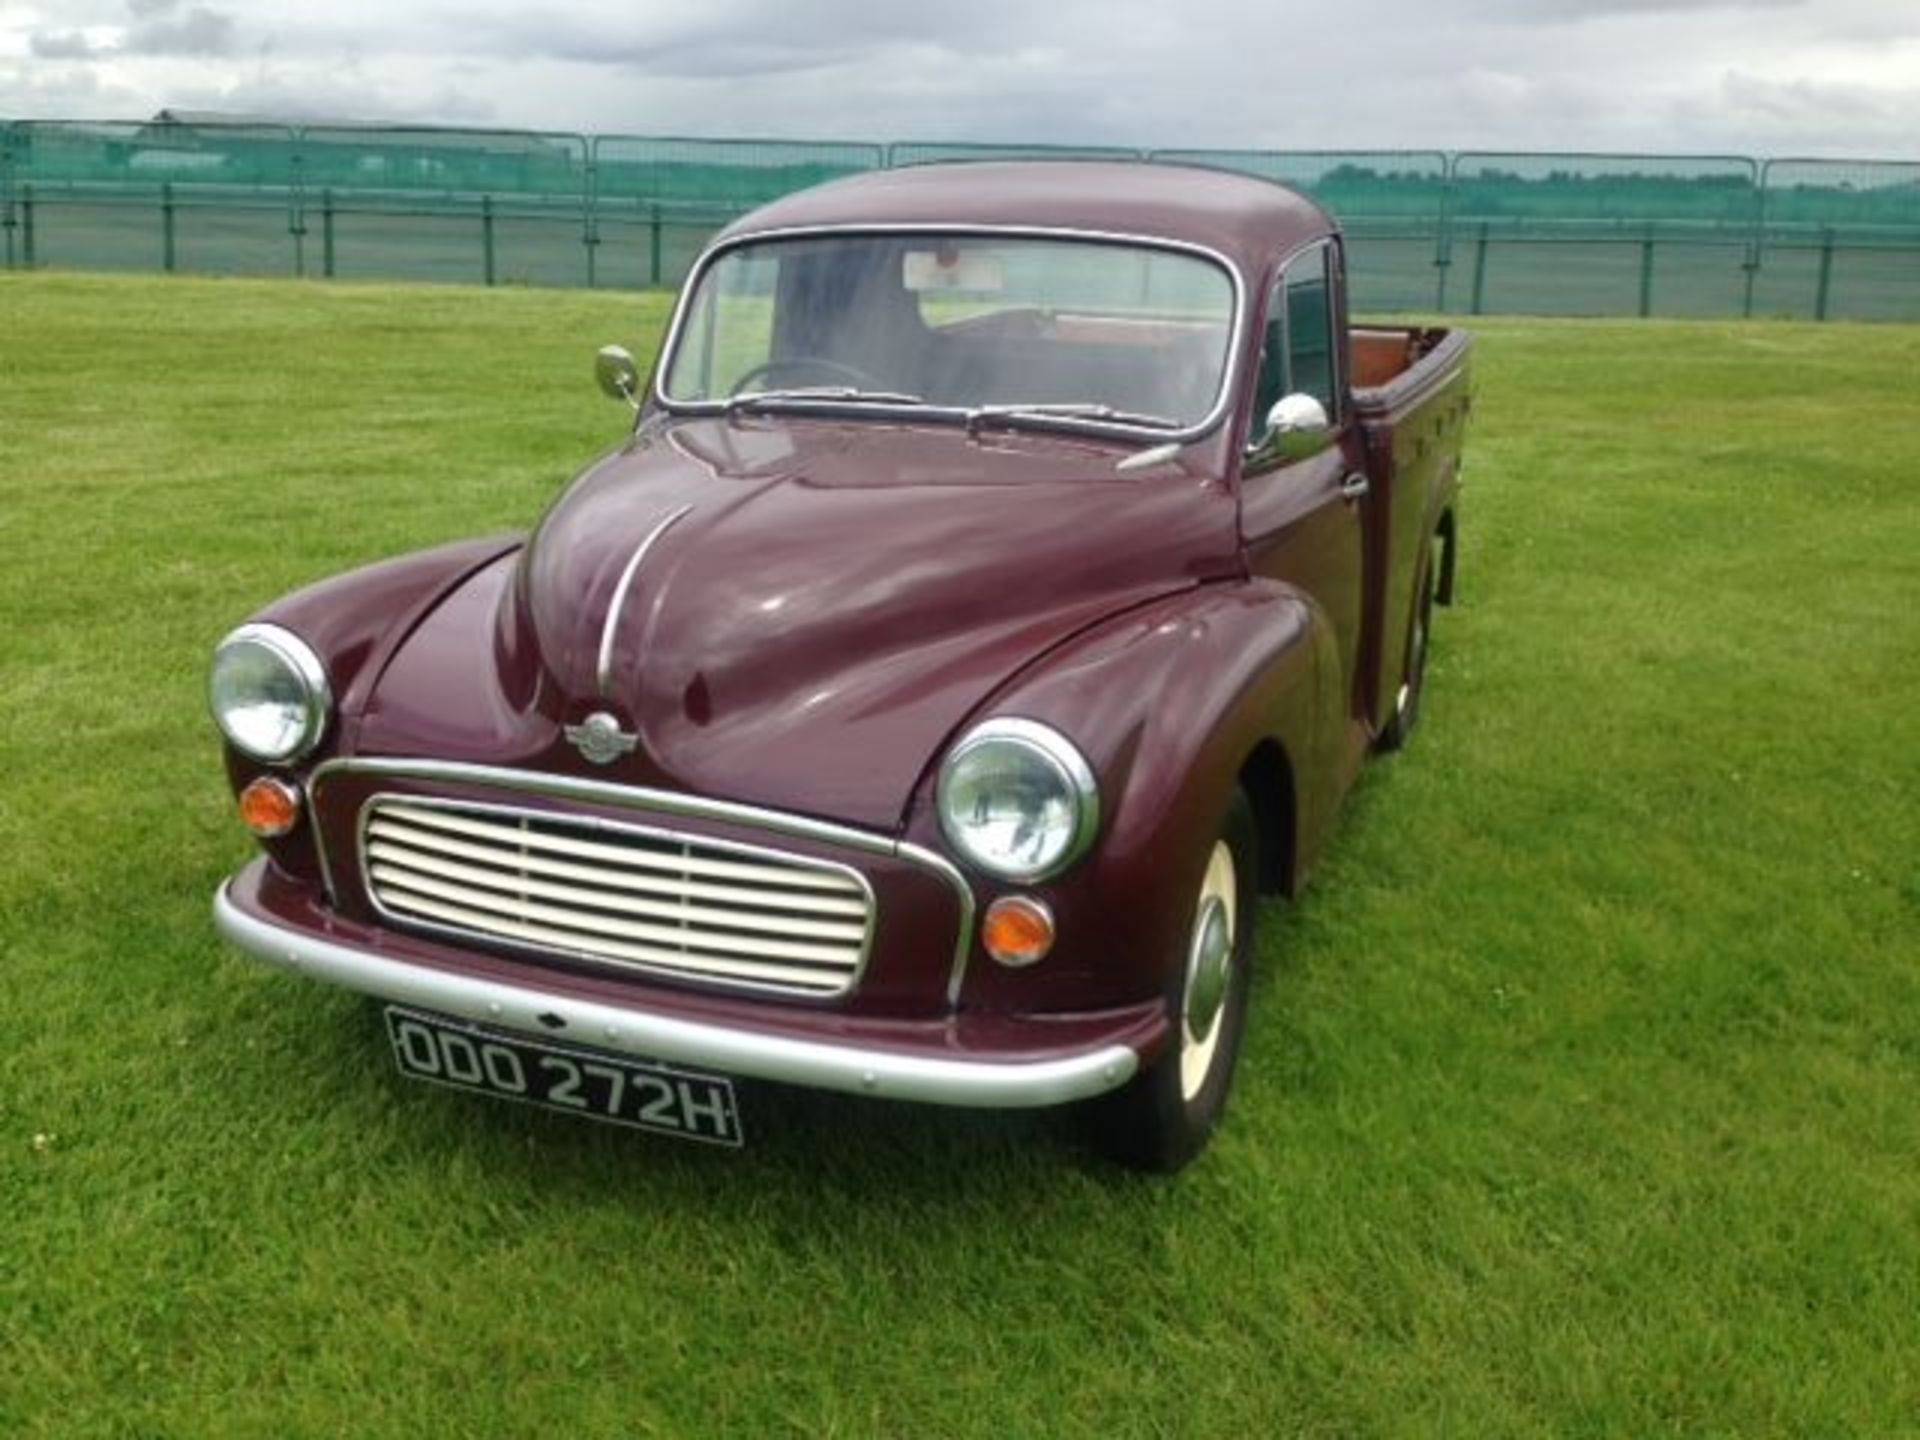 MORRIS, 1000 - 1098cc, Chassis number MAU5/287765 - first registered on April 16th 1970 in the